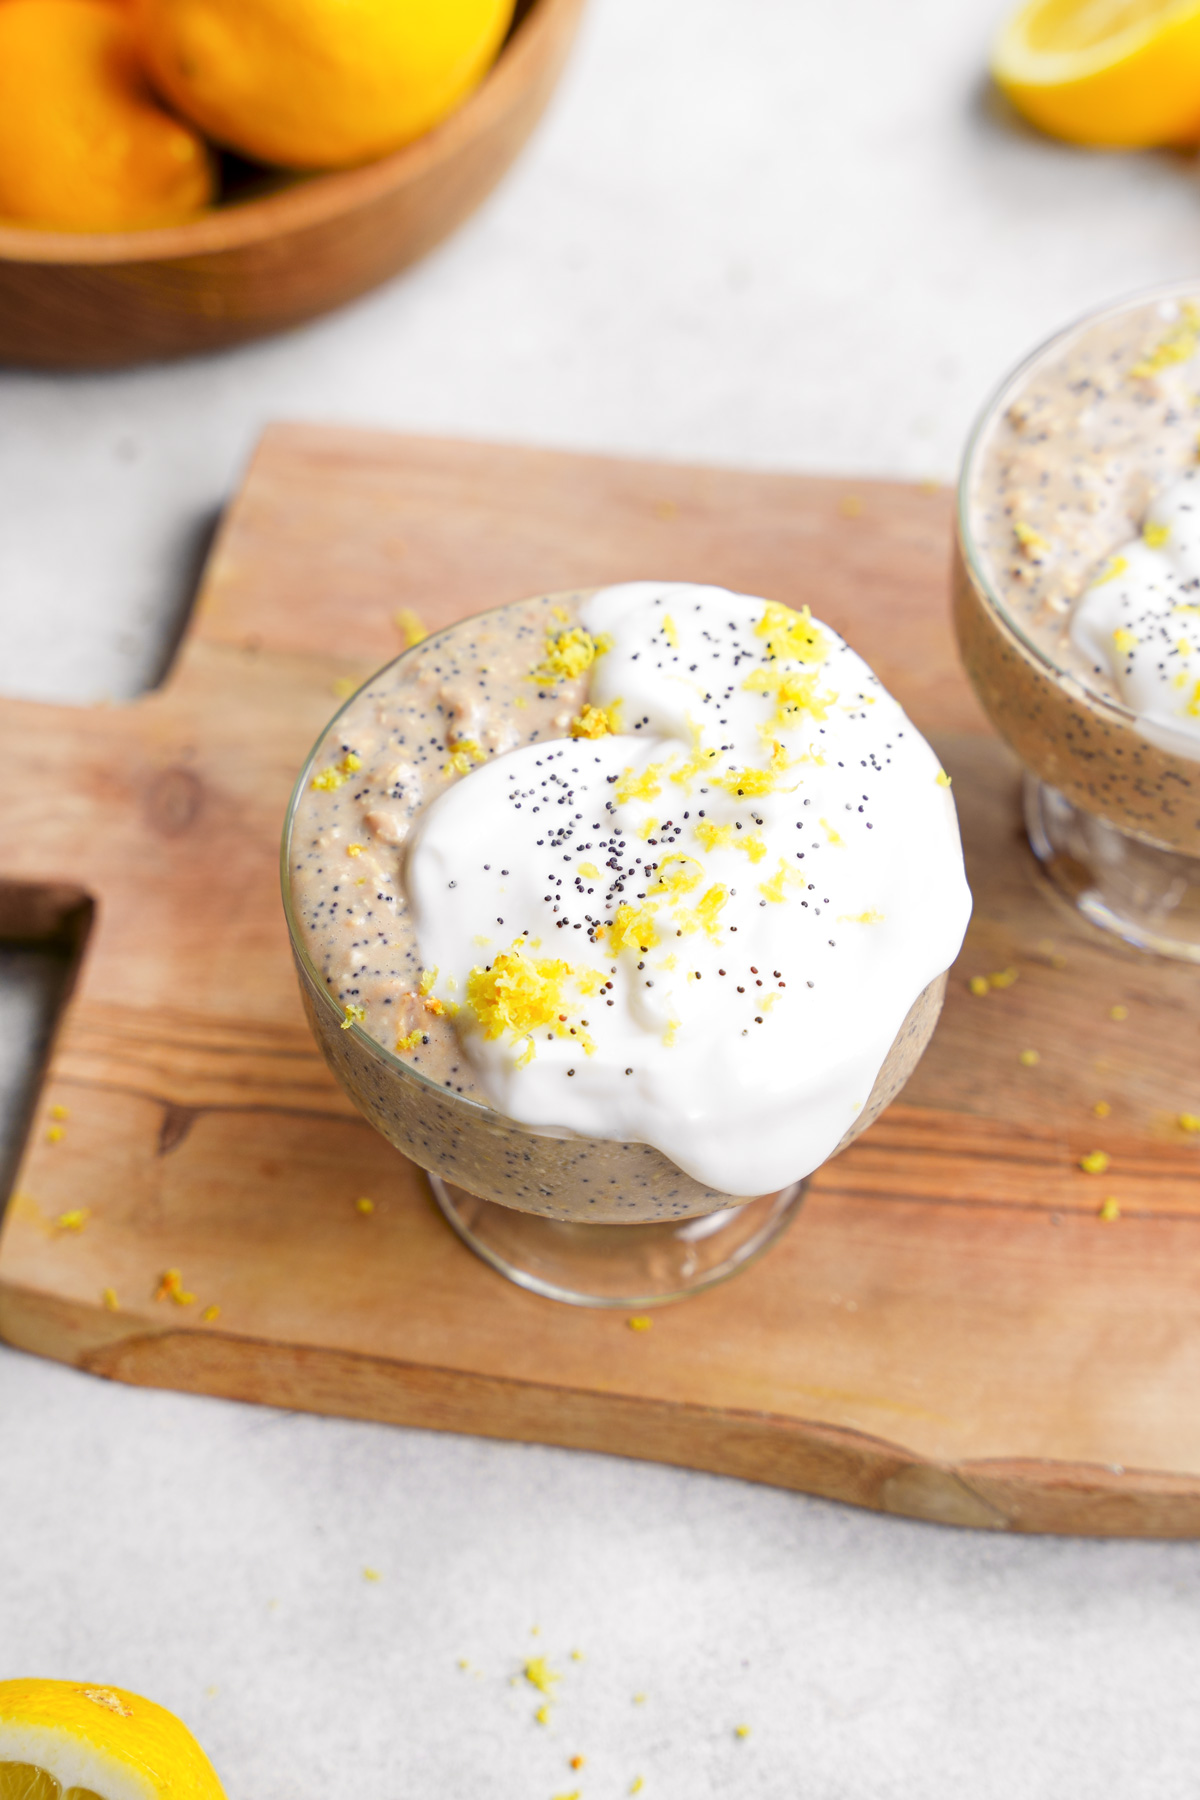 a close up of the lemon poppyseed overnight oats to show the creamy texture